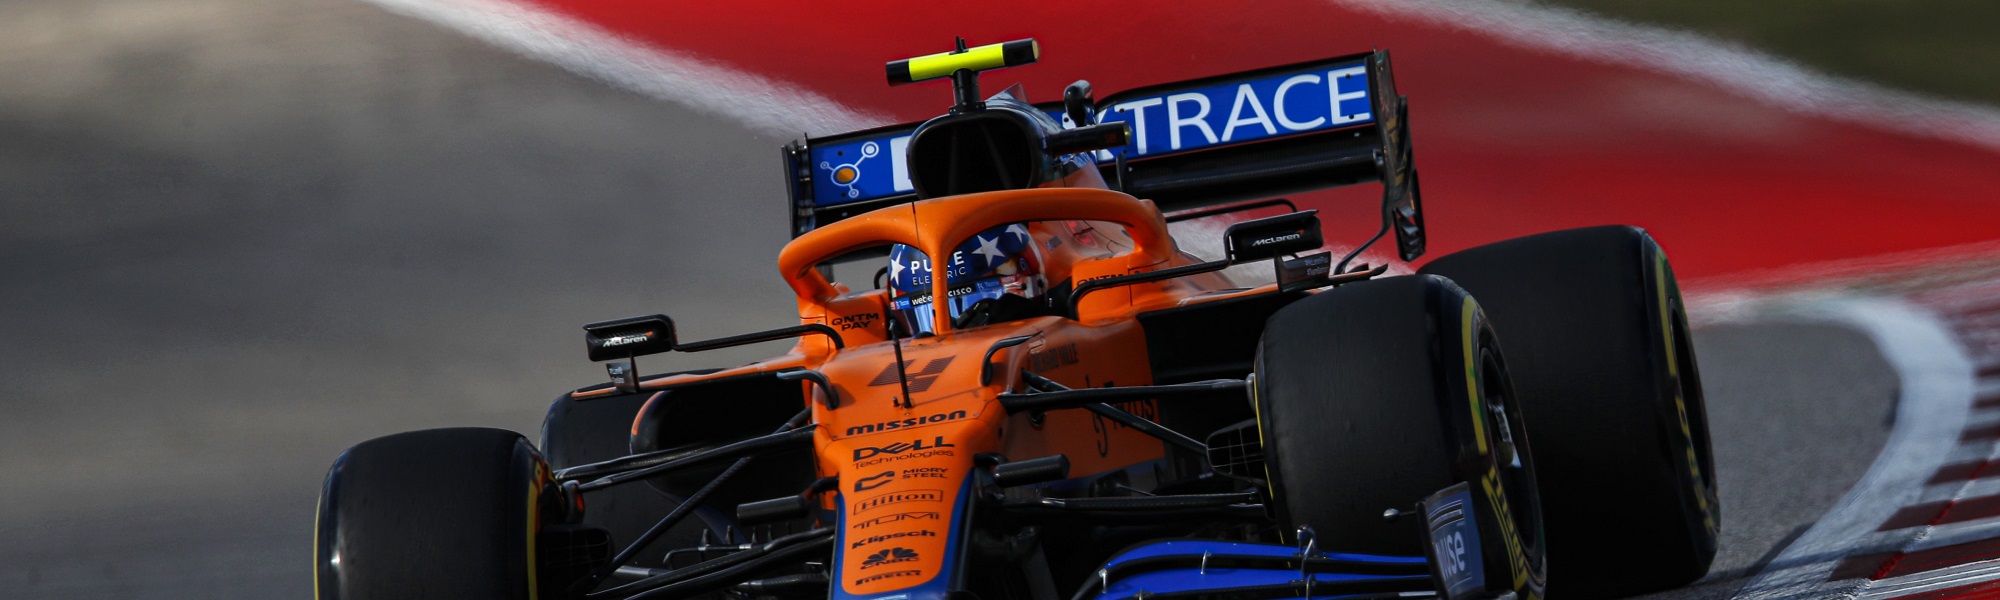 Here’s How McLaren Racing Are Working to Accelerate The Sustainability Agenda in F1